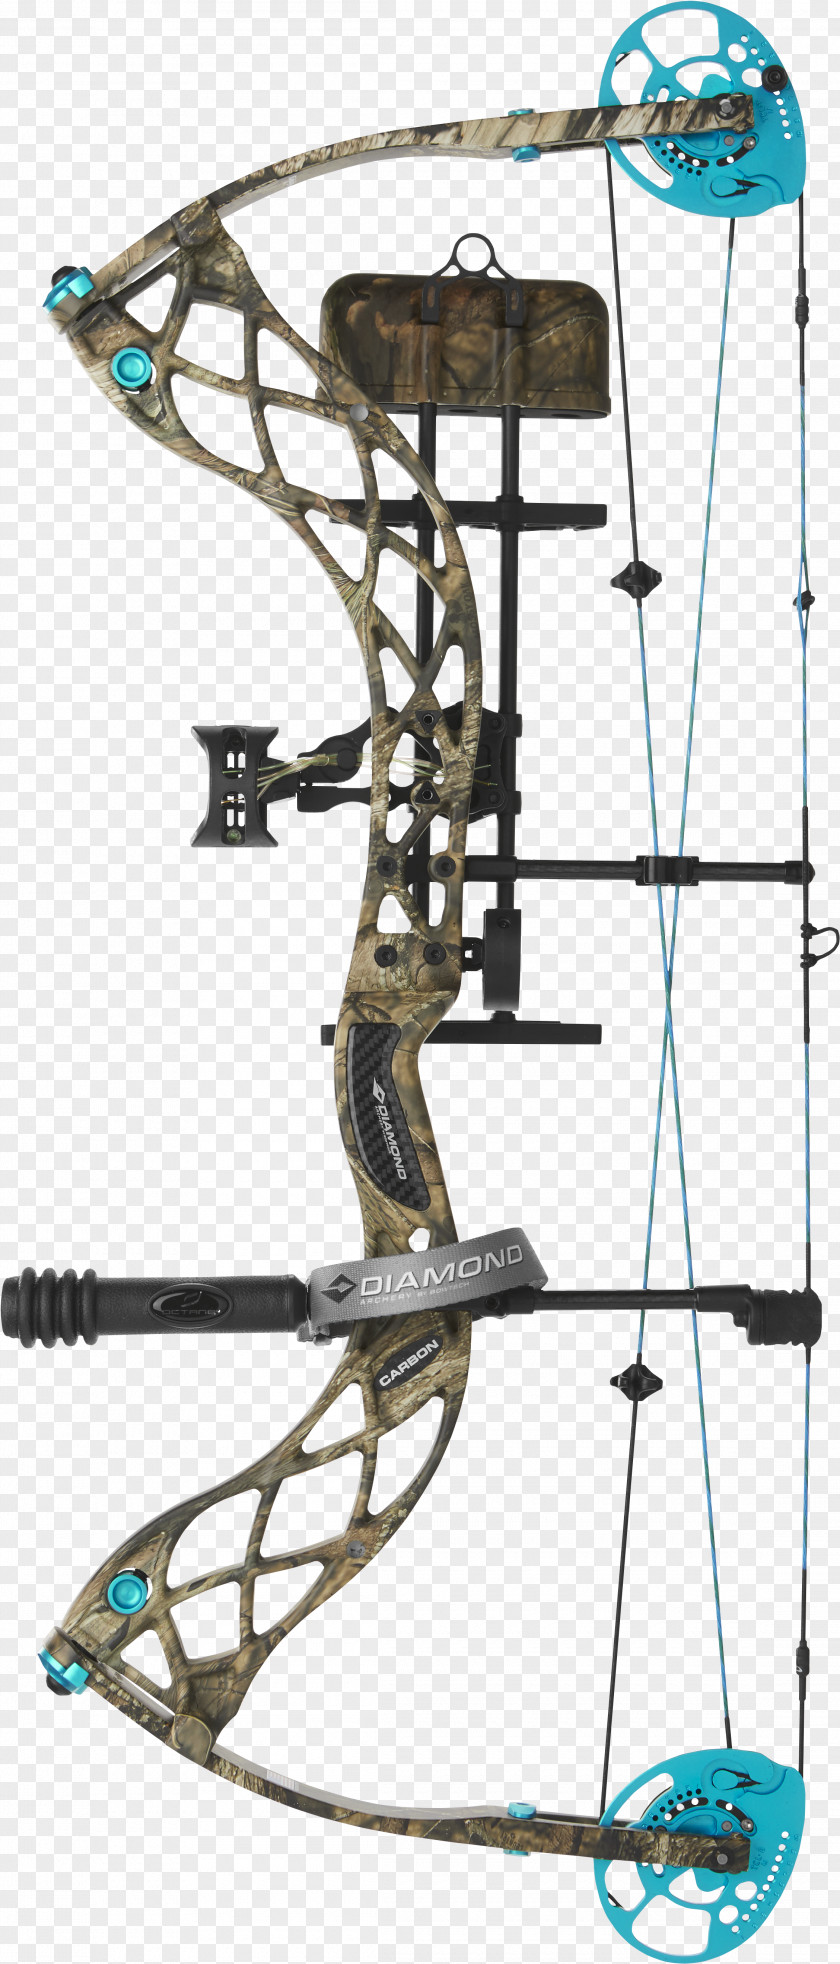 Archery Puppies Compound Bows Bow And Arrow Hunting Carbon PNG